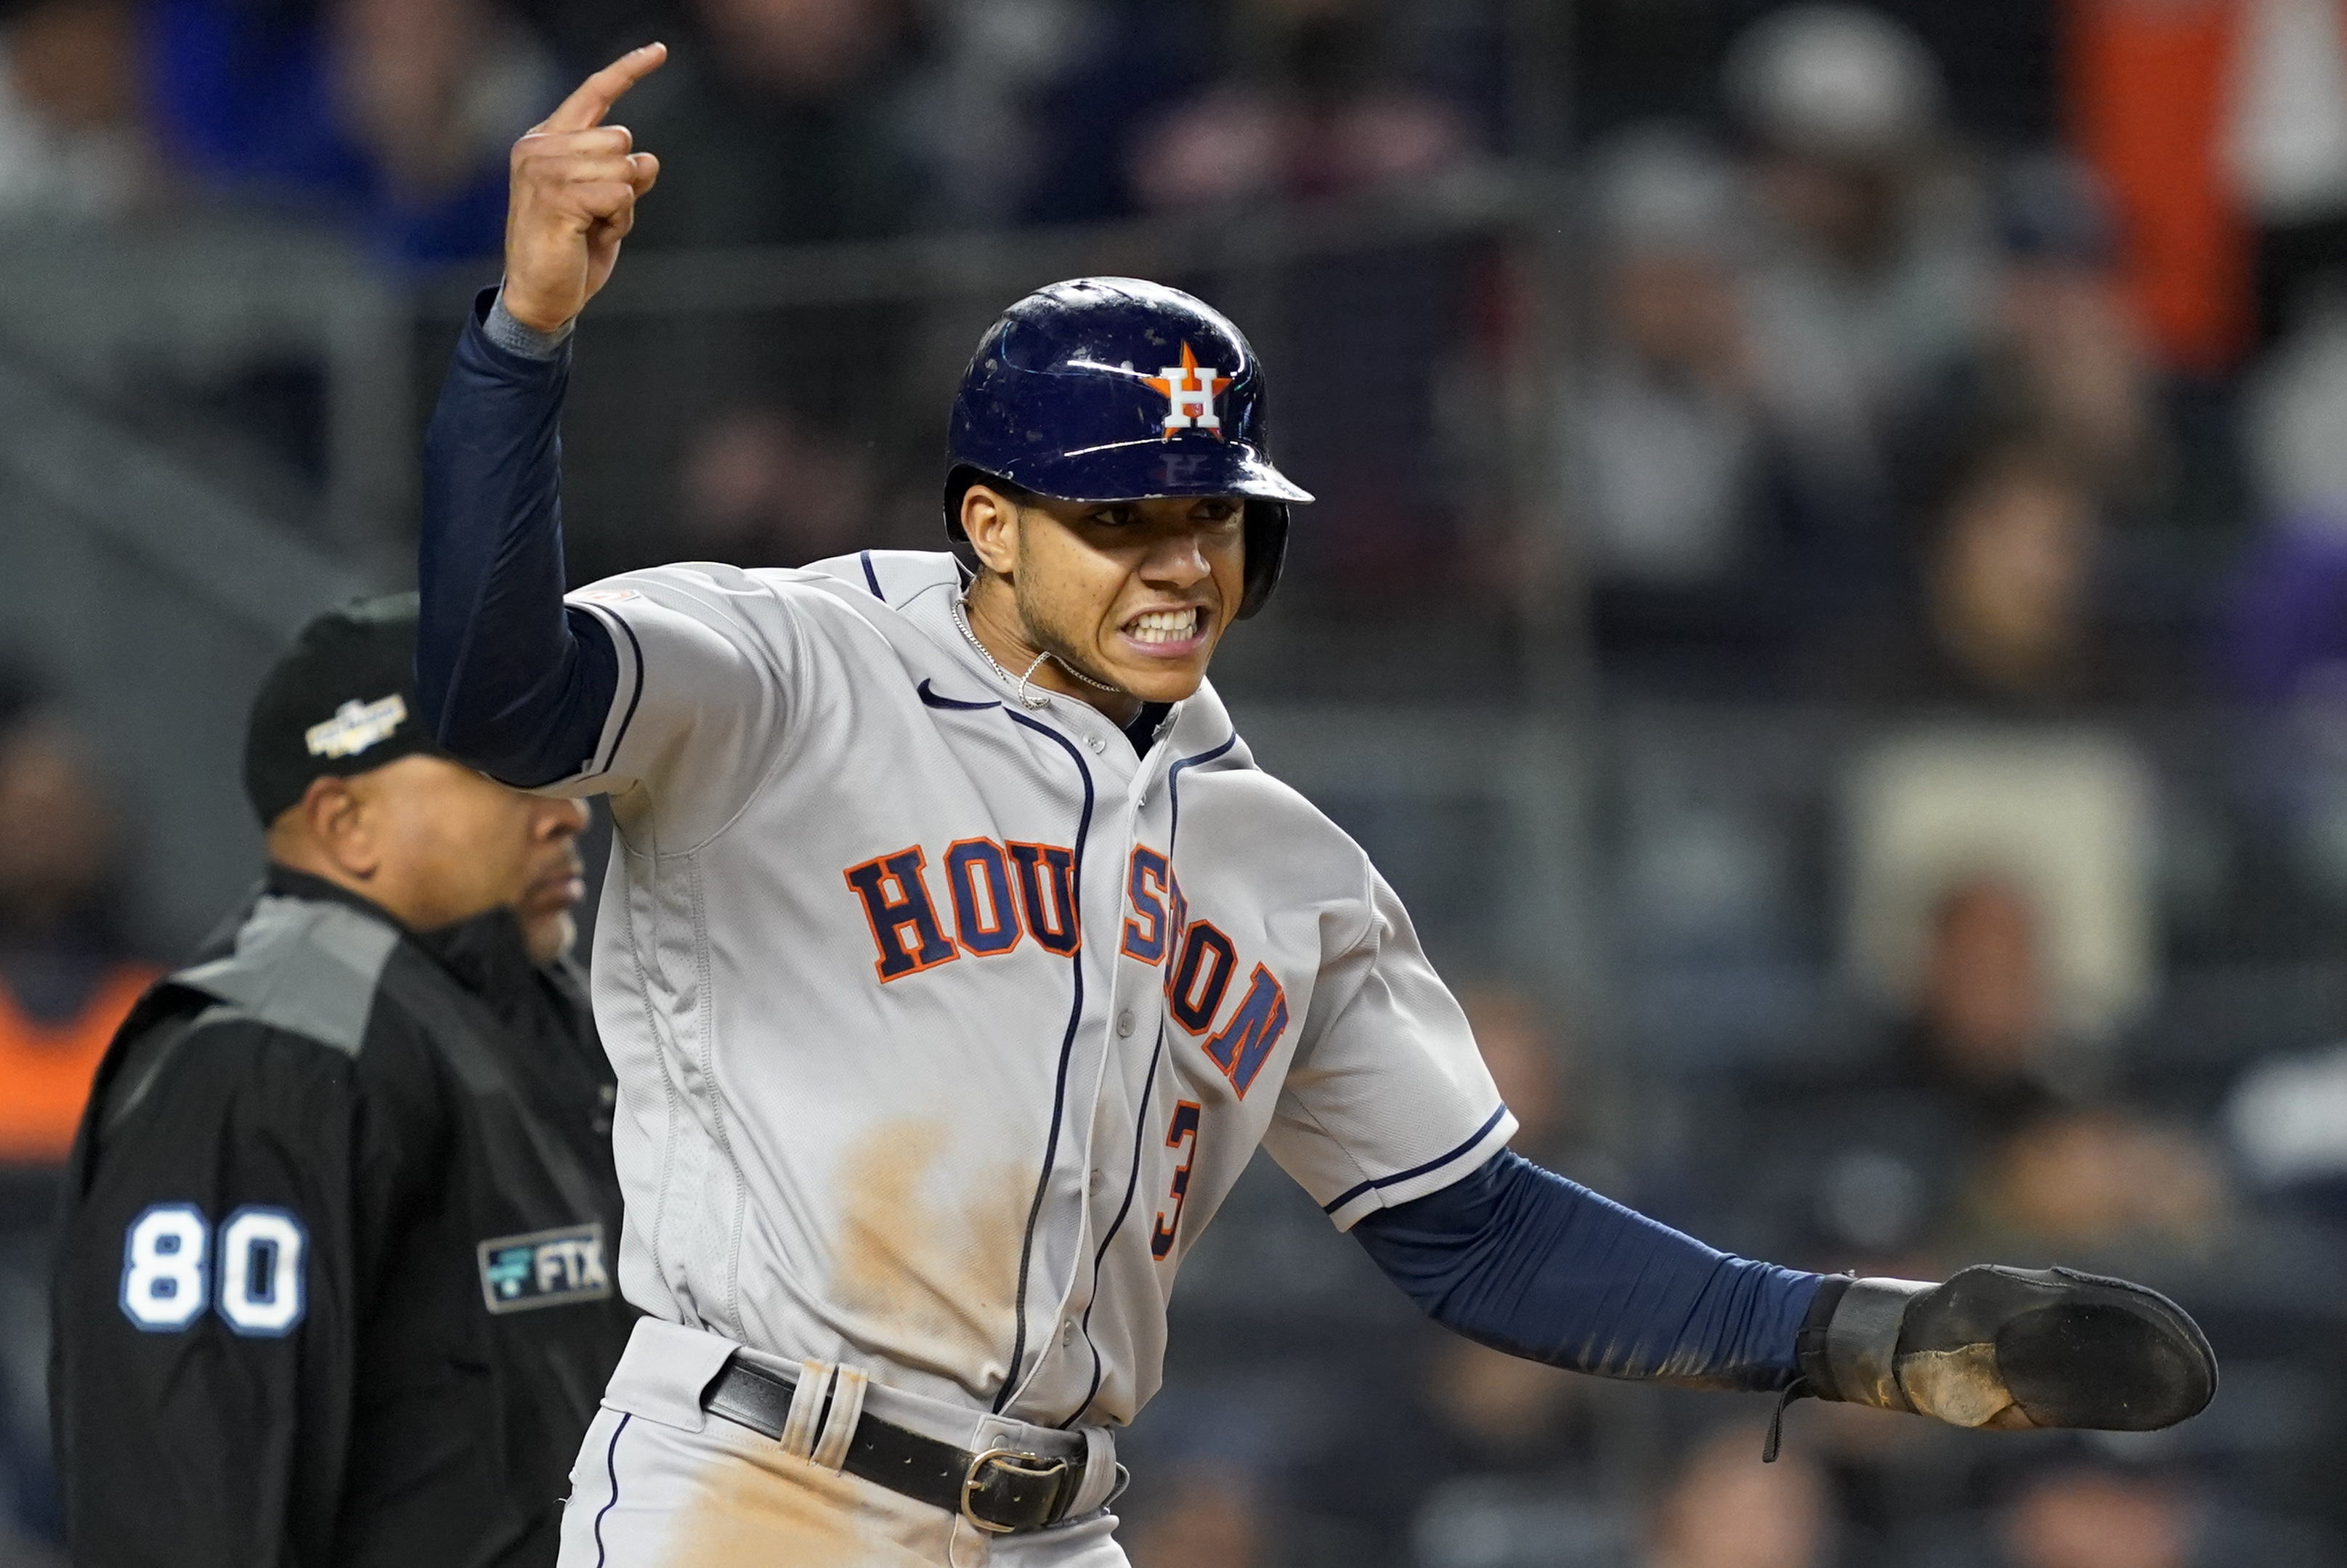 Former UMaine star wins ALCS MVP, leads Astros to the World Series